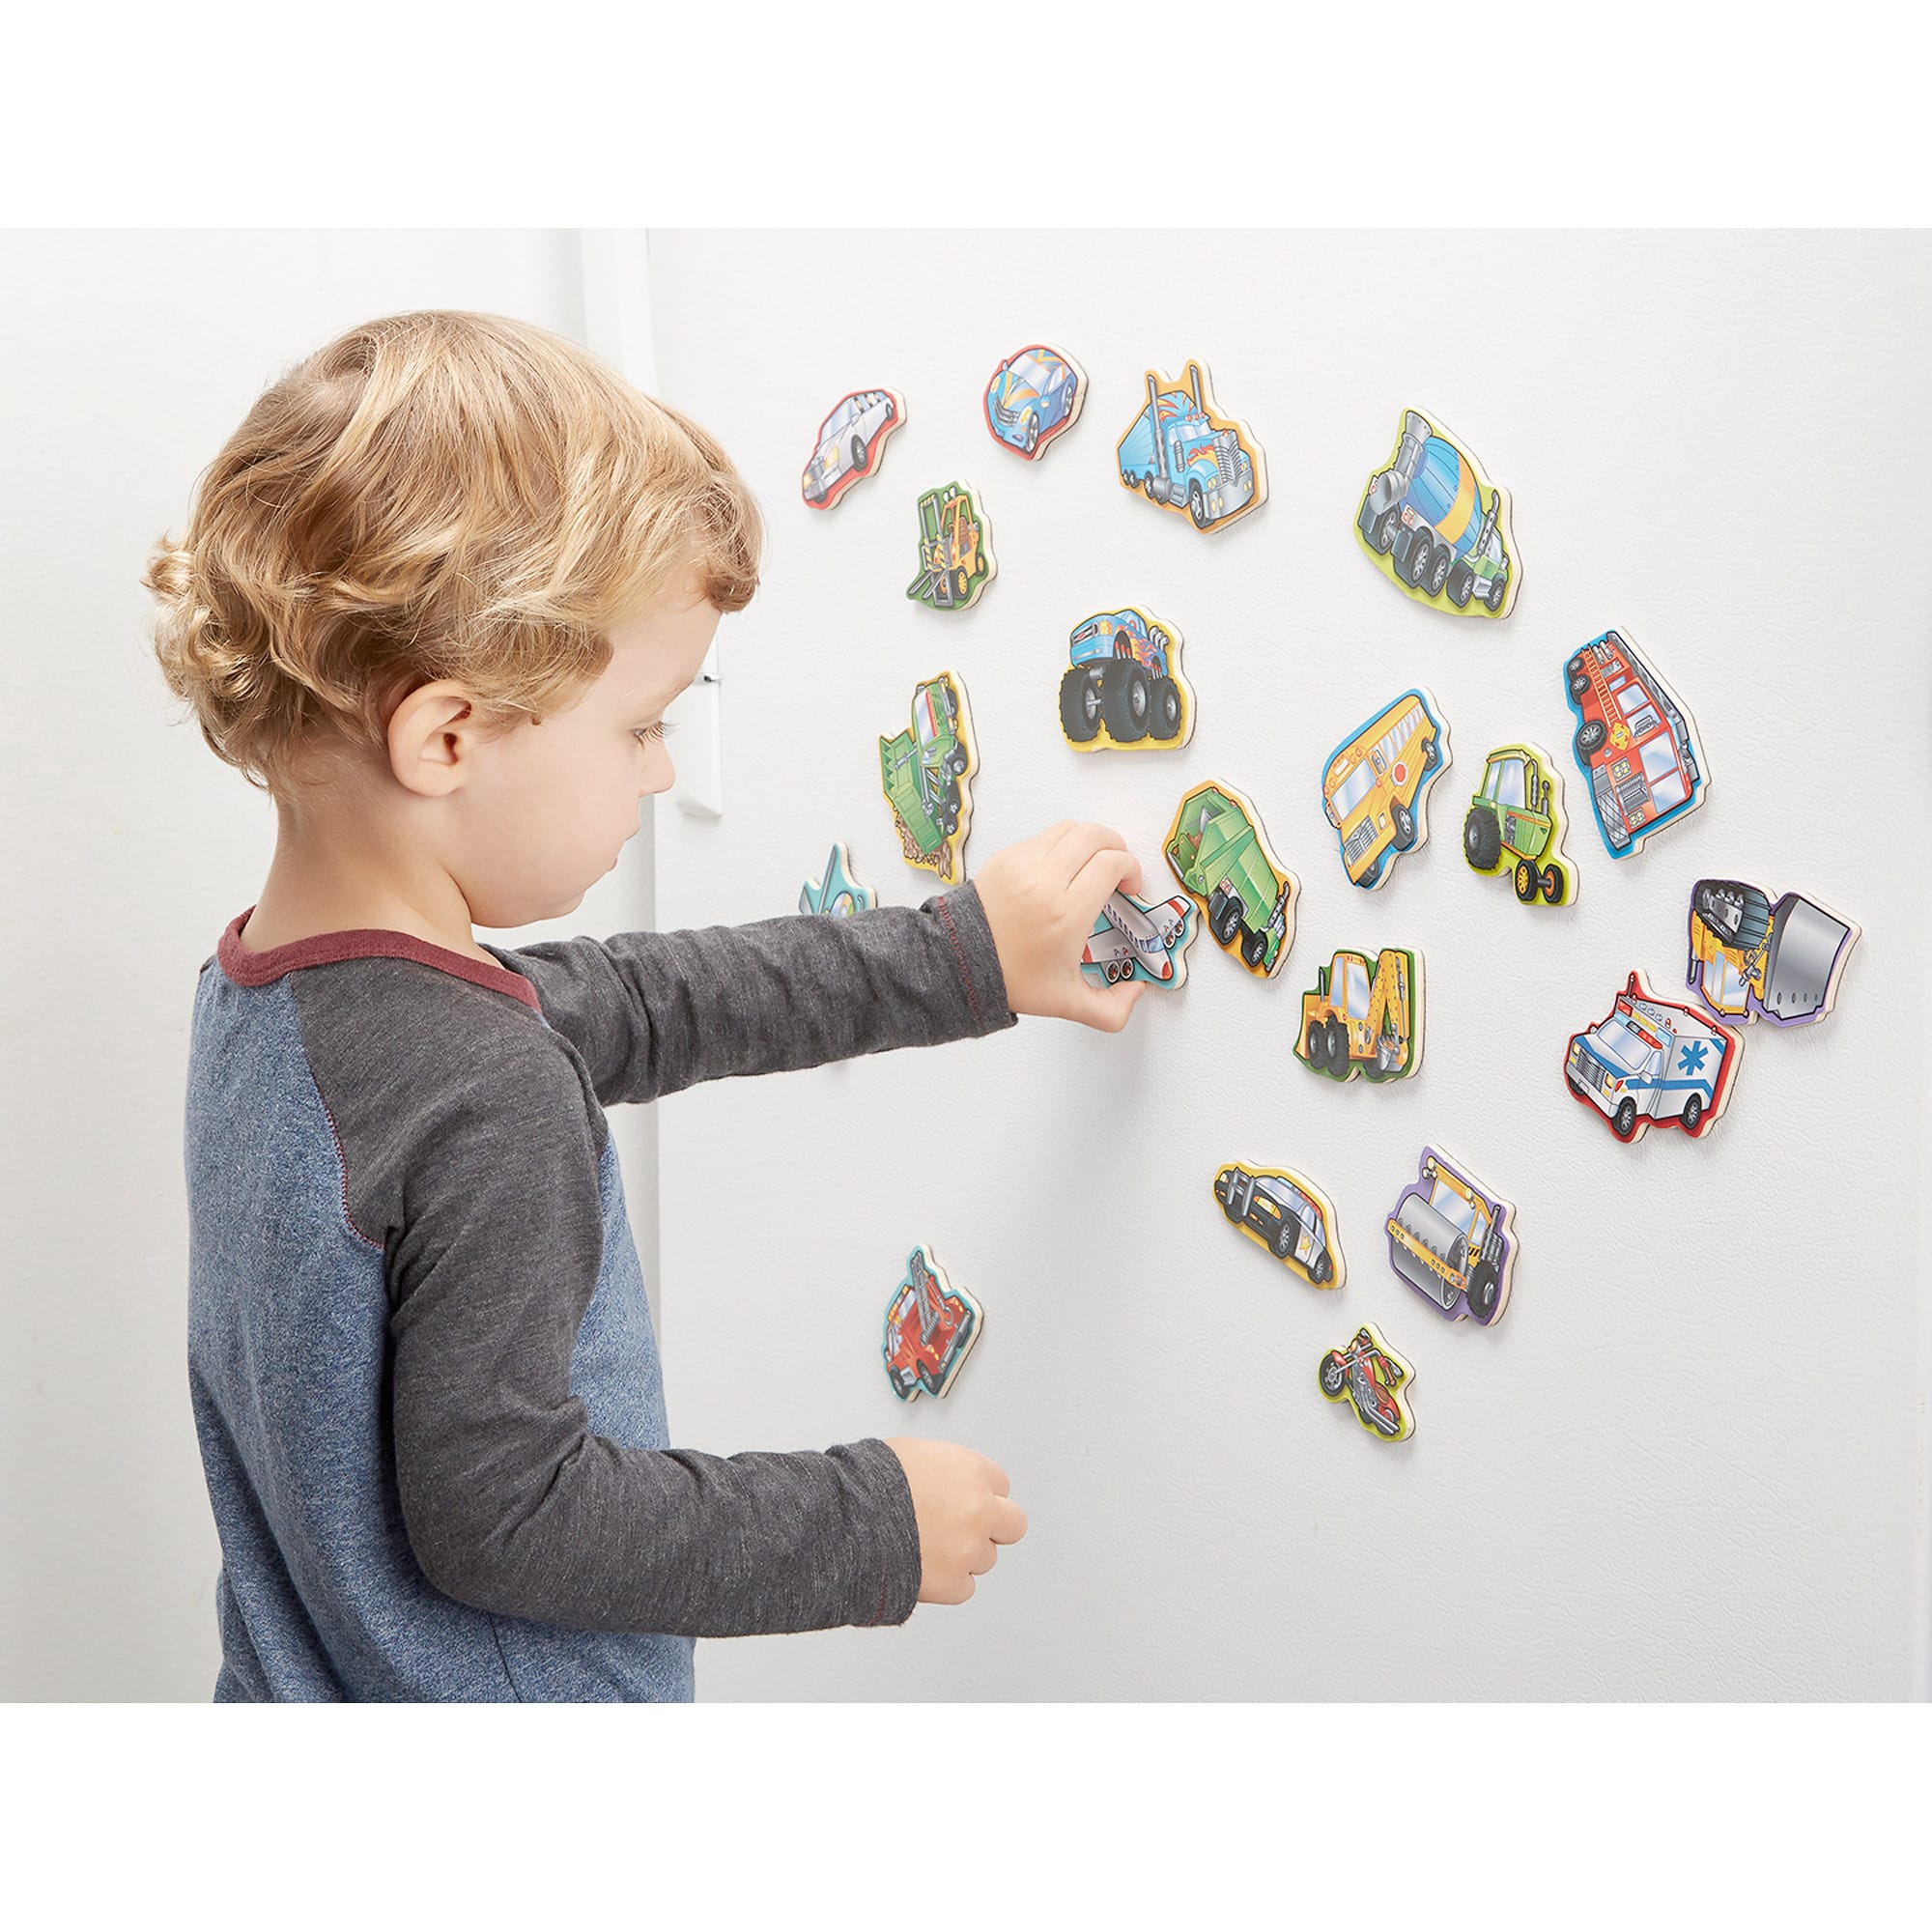 Melissa and Doug - Wooden Vehicle Magnets - 20 Pieces